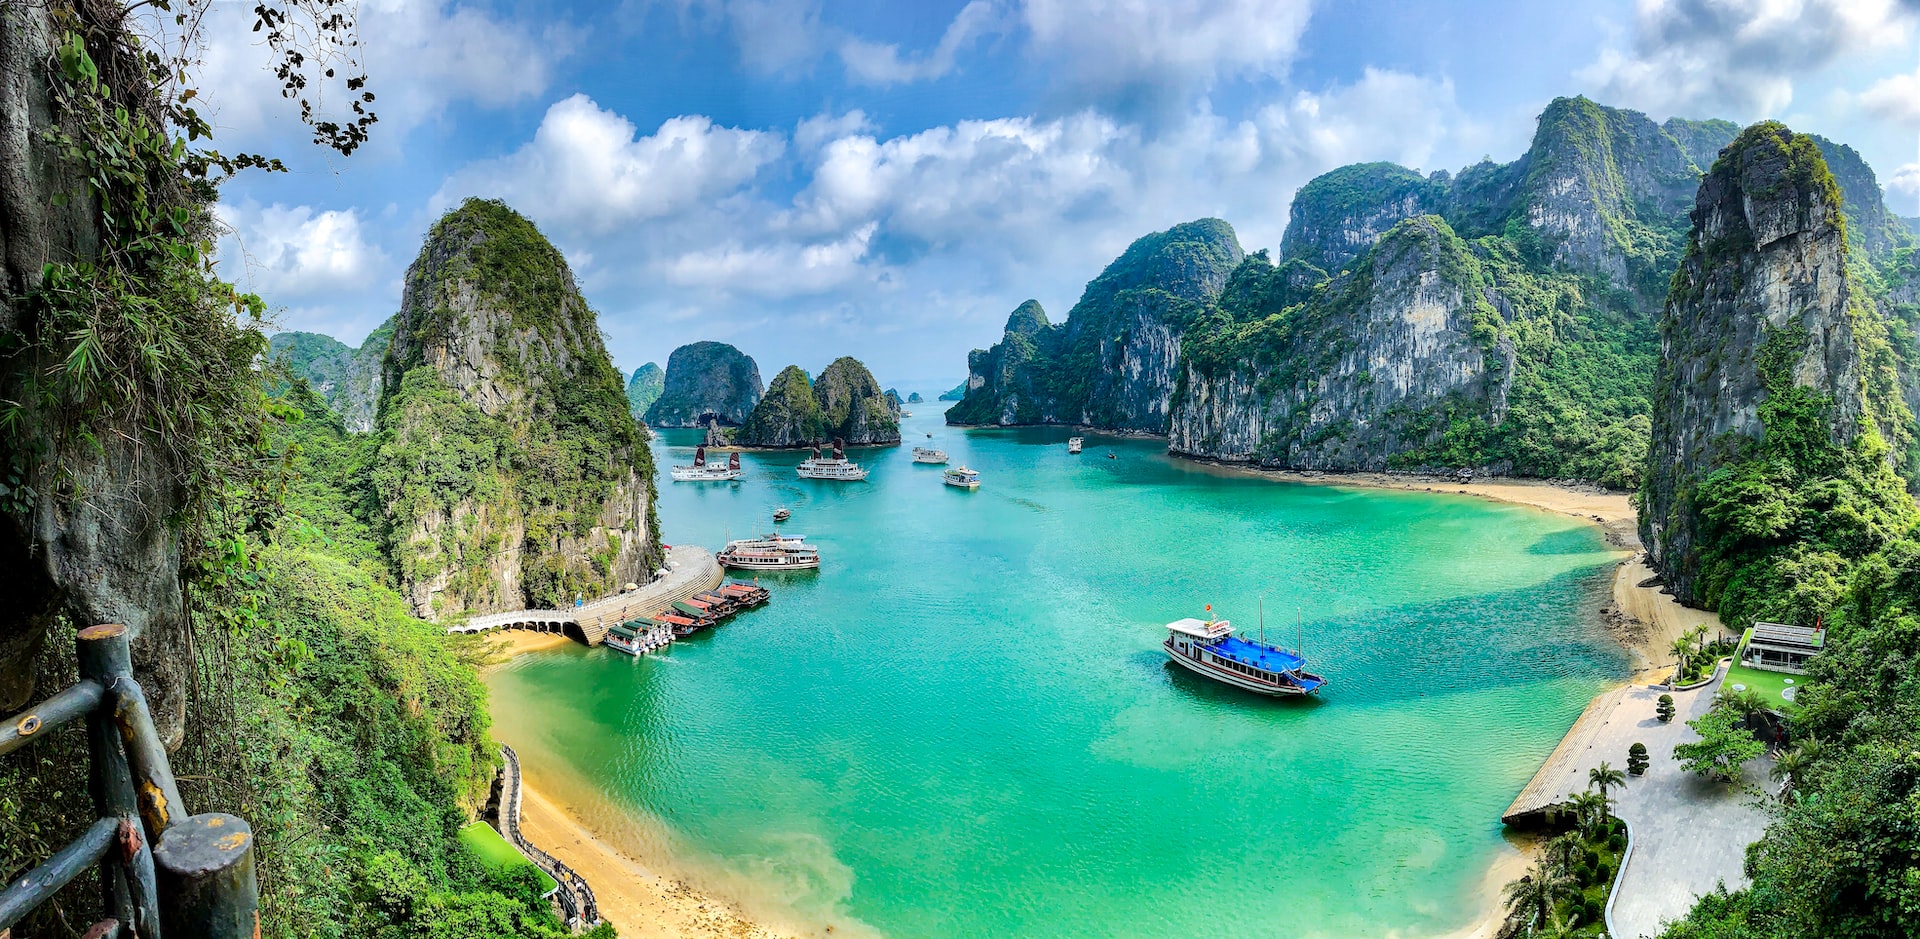 How Much Lucky Money to Give in Vietnam - i Tour Vietnam Travel Guides